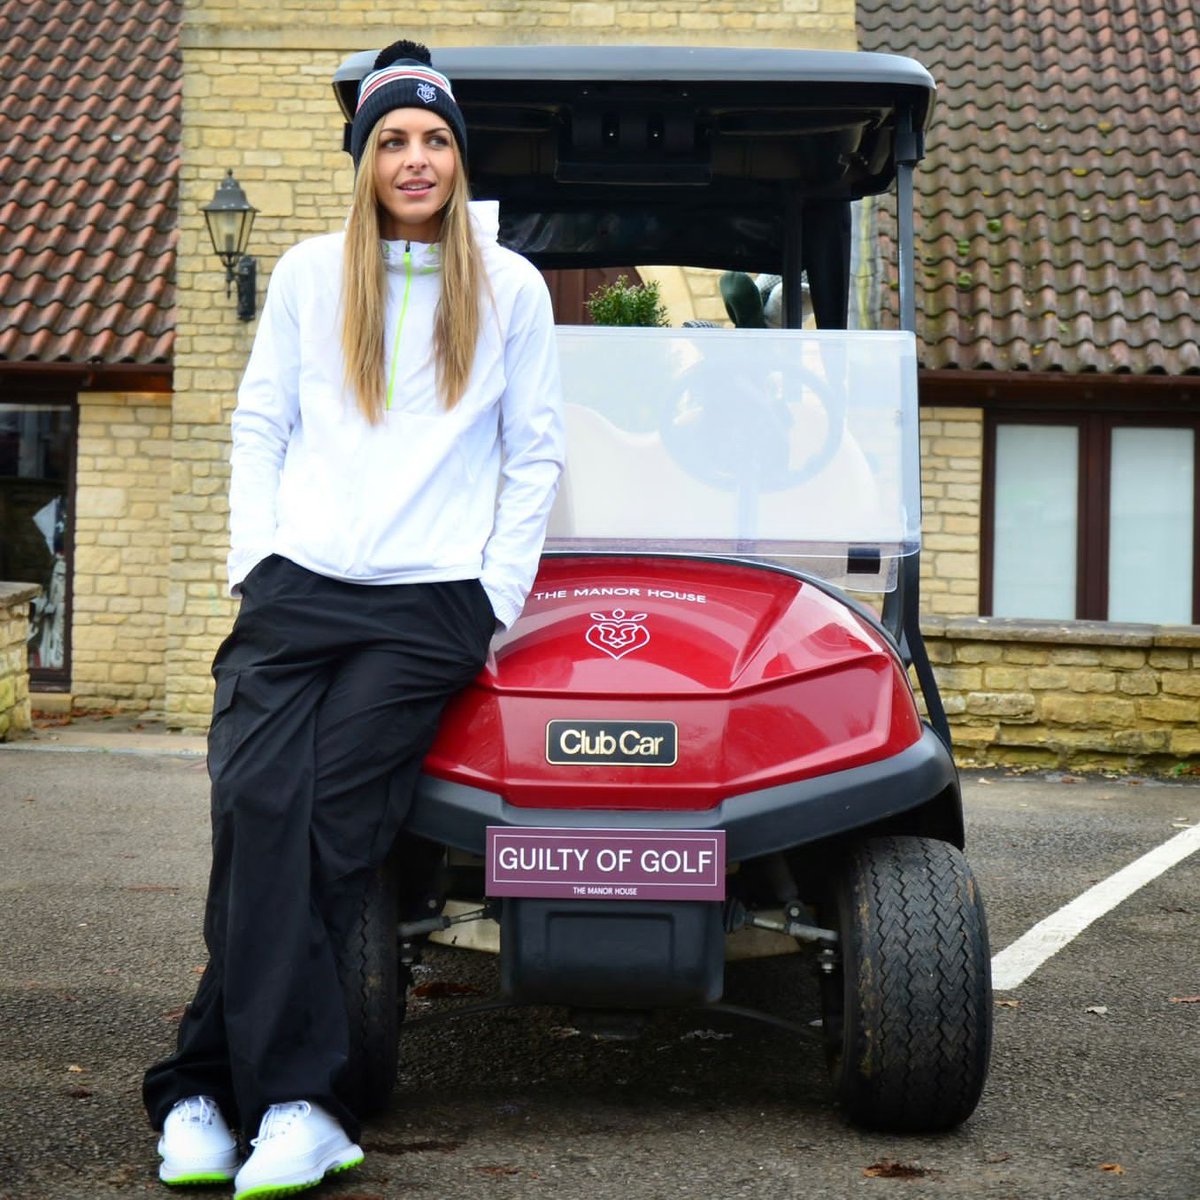 We are very excited to announce our partnership with Lauren Prince, also known as Guilty of Golf on Instagram. Her support with our golf offering across the collection will take it to another level, as we look to encourage even more girls and women to take up the sport⛳